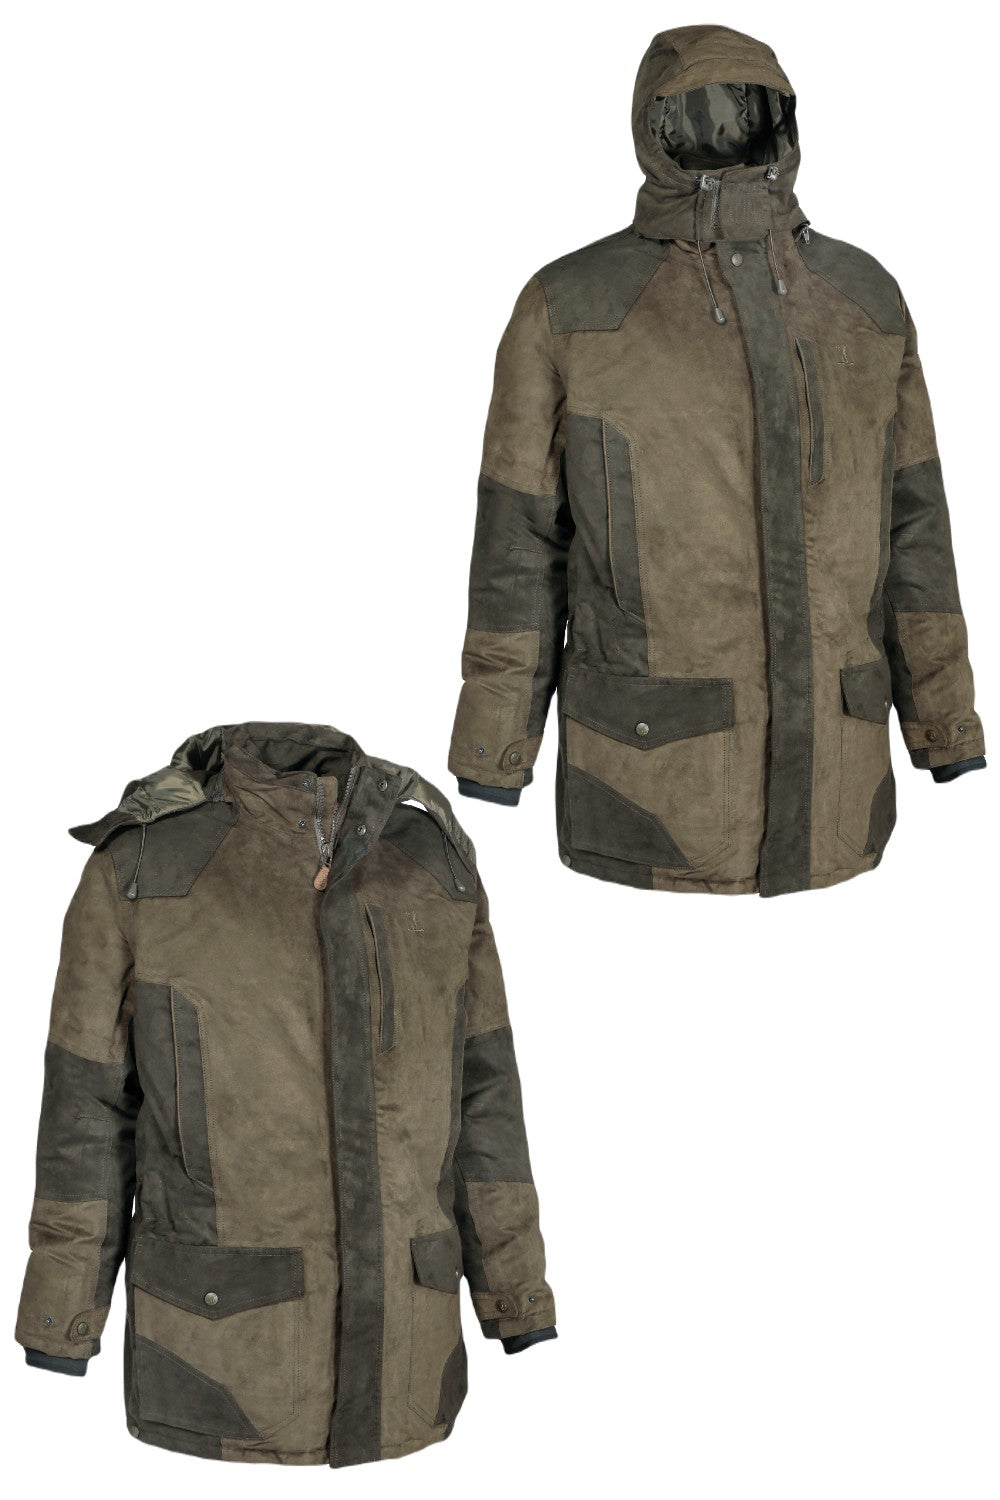 Percussion Grand Nord Hunting Jacket in Khaki